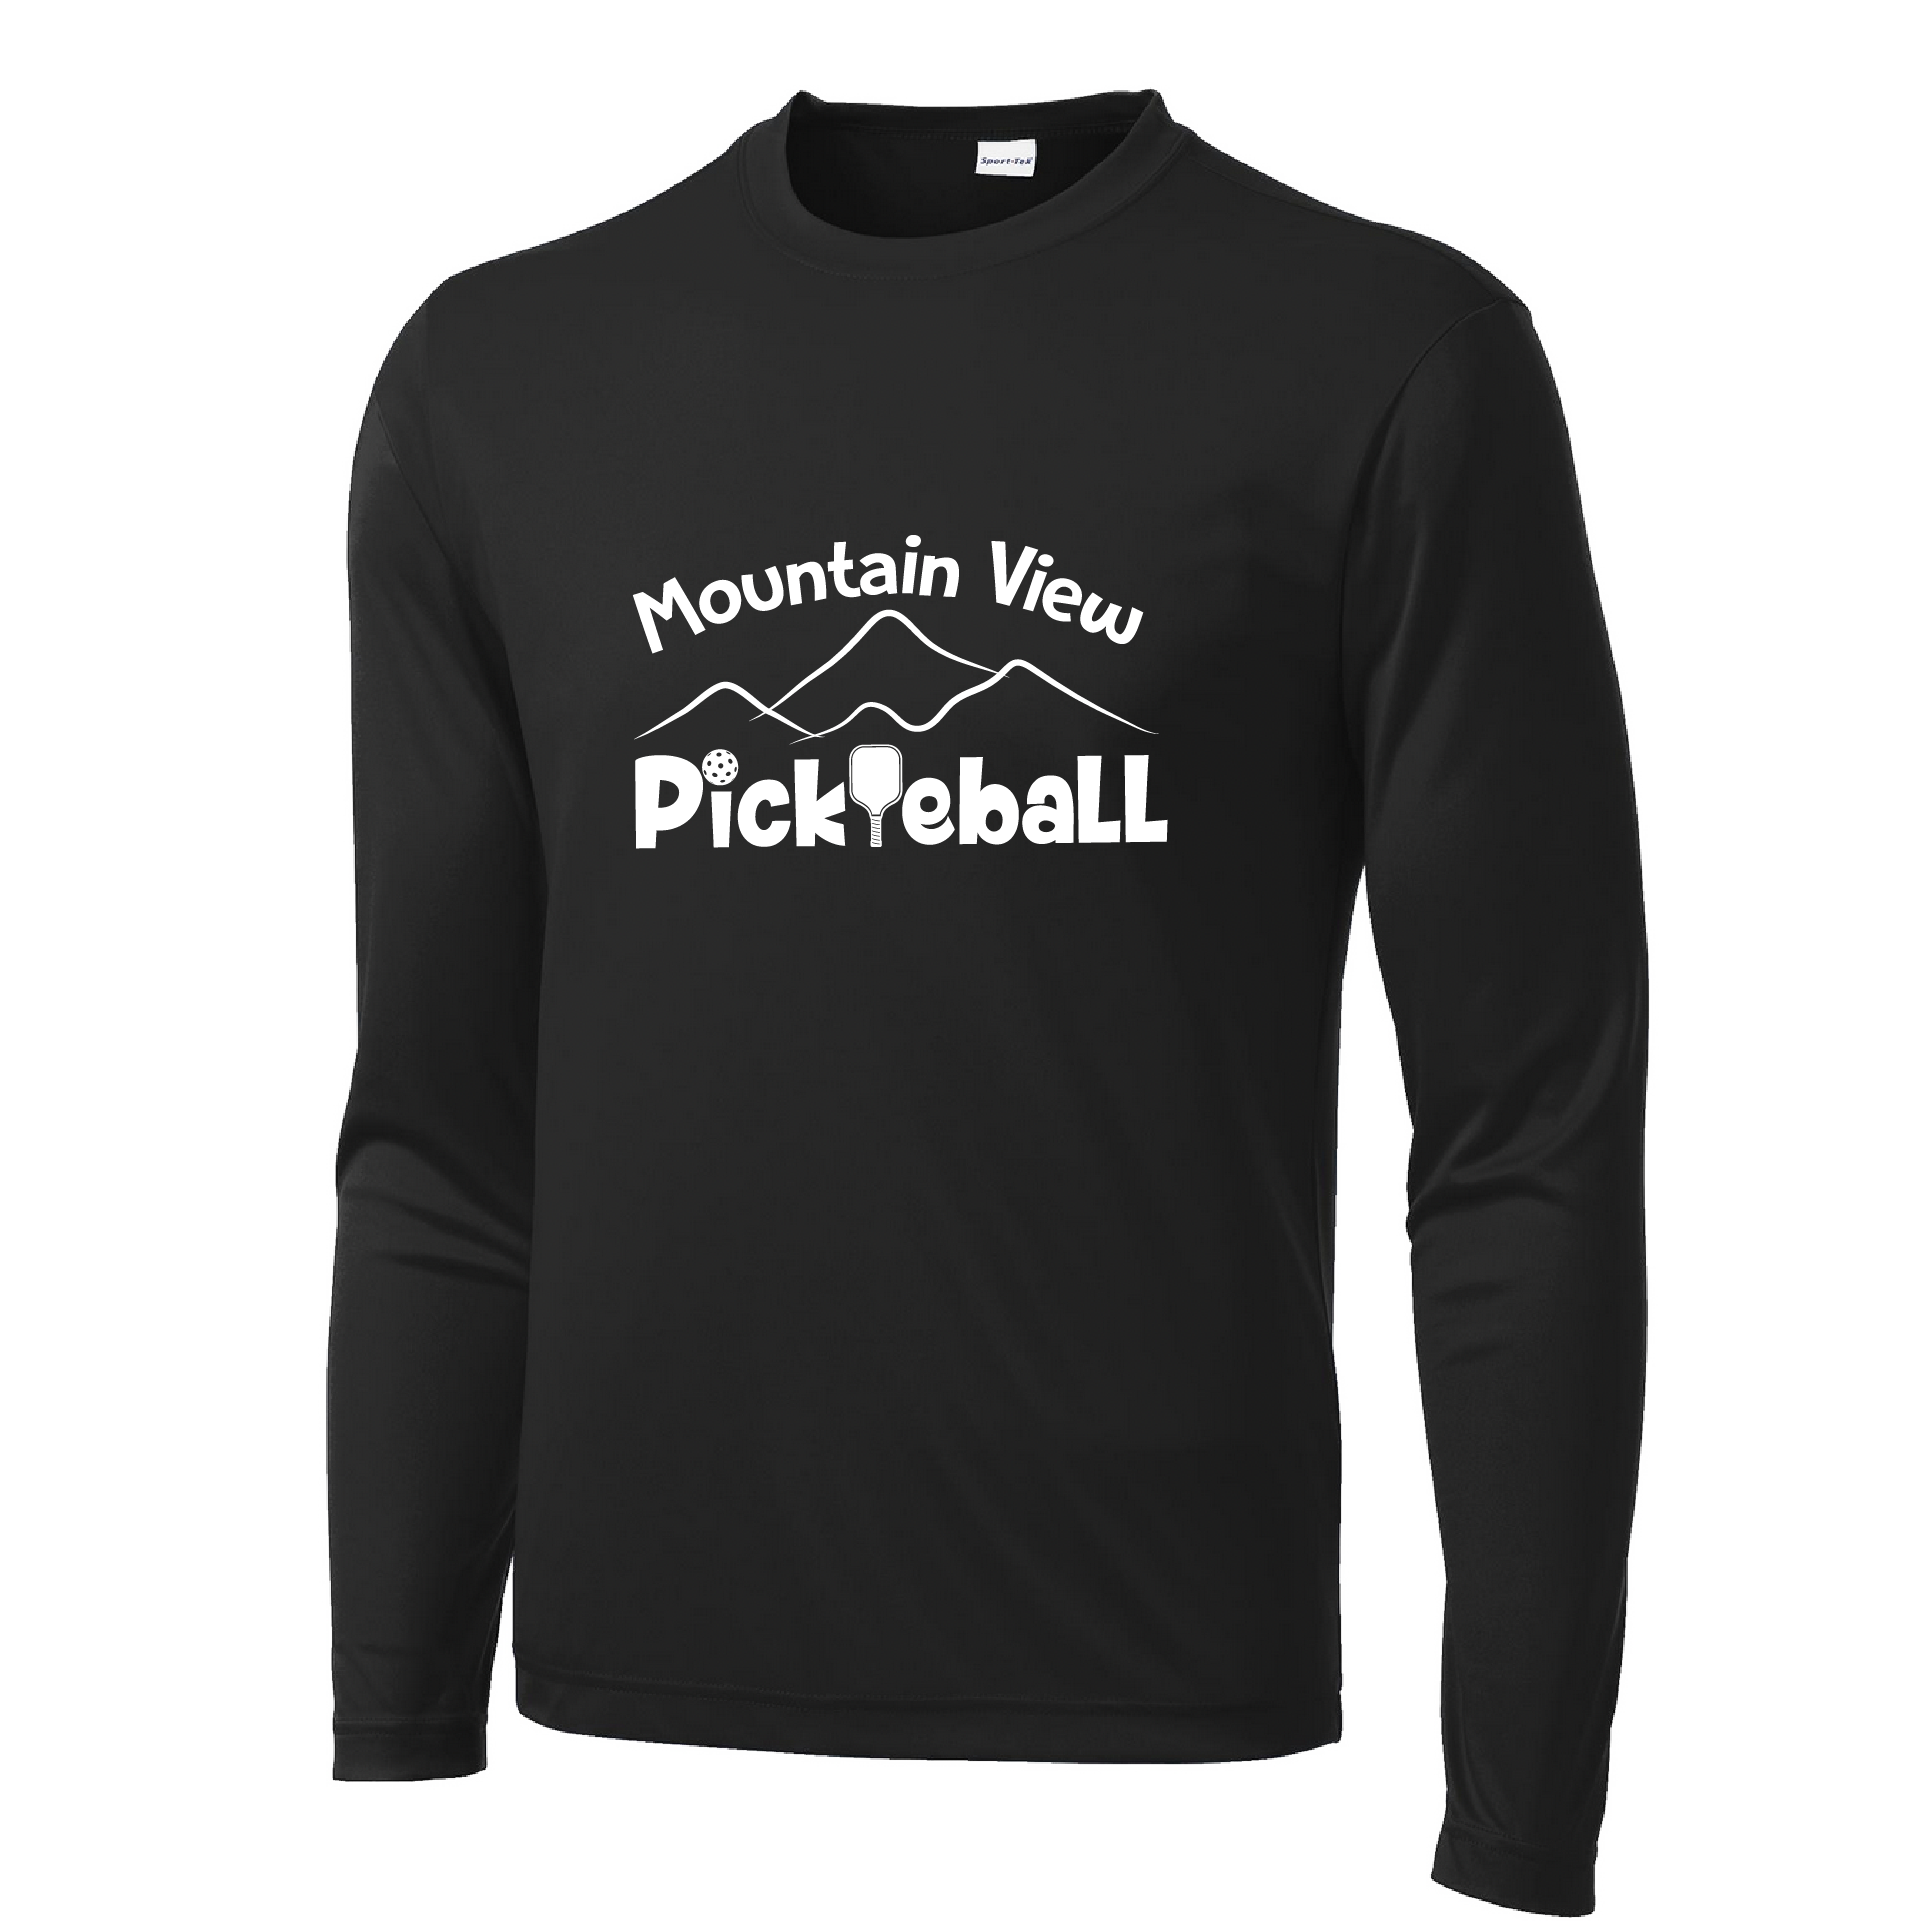 Pickleball Design: Mountain View Pickleball Club  Men's Styles: Long-Sleeve  Turn up the volume in this Men's shirt with its perfect mix of softness and attitude. Material is ultra-comfortable with moisture wicking properties and tri-blend softness. PosiCharge technology locks in color. Highly breathable and lightweight.